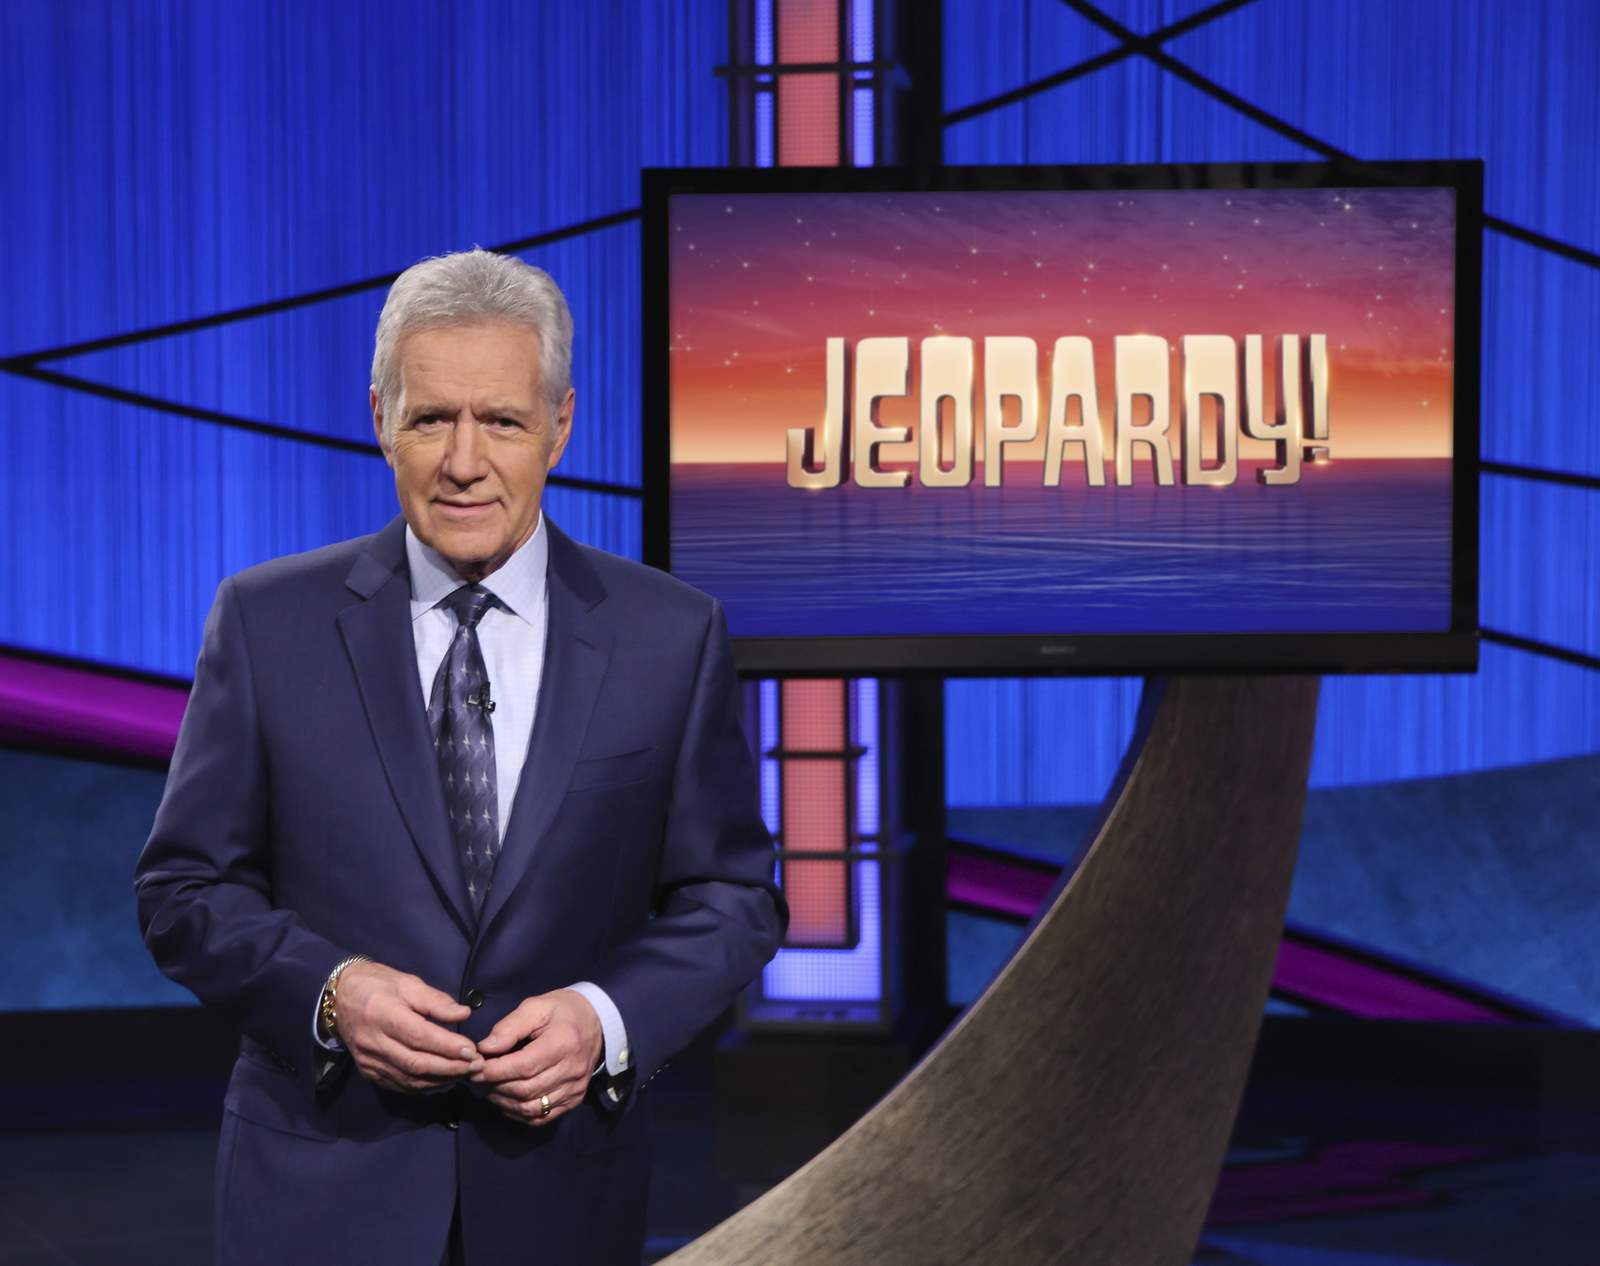 ‘Jeopardy!’ host Alex Trebek dead at 80 after battle with pancreatic cancer